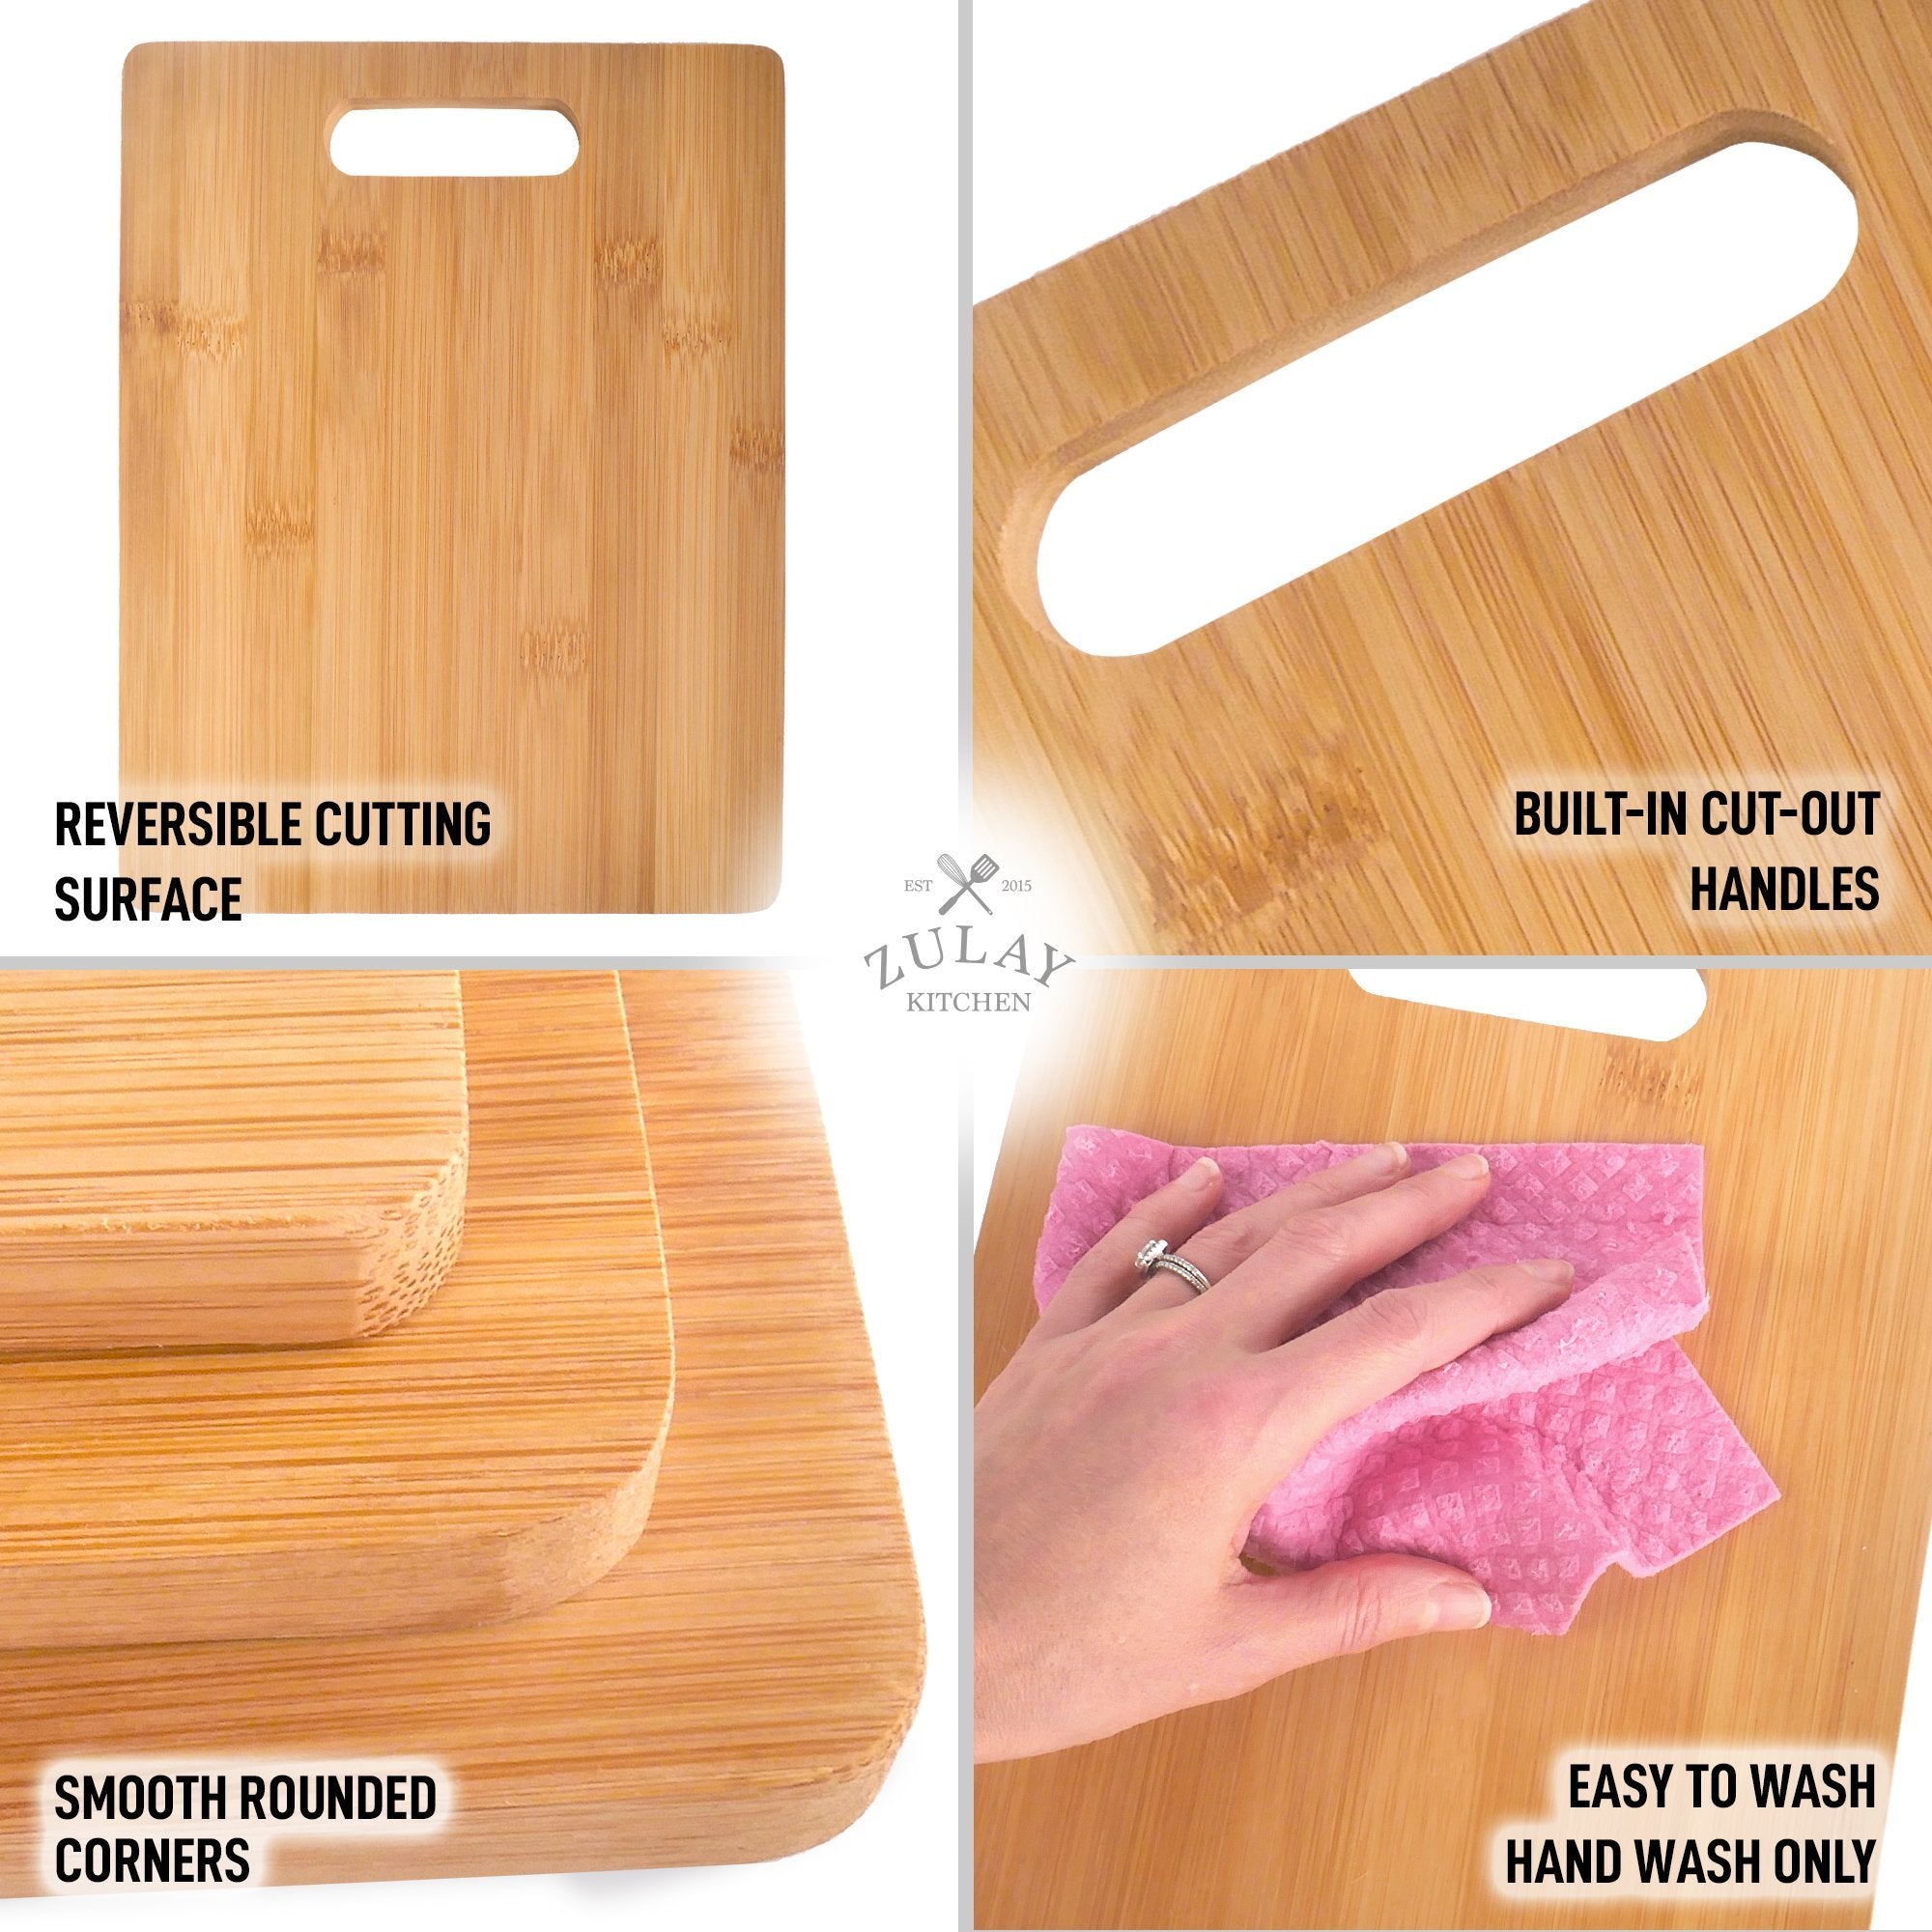 Bamboo Wooden Cutting Boards - 3 Assorted Sizes - Zulay KitchenZulay Kitchen